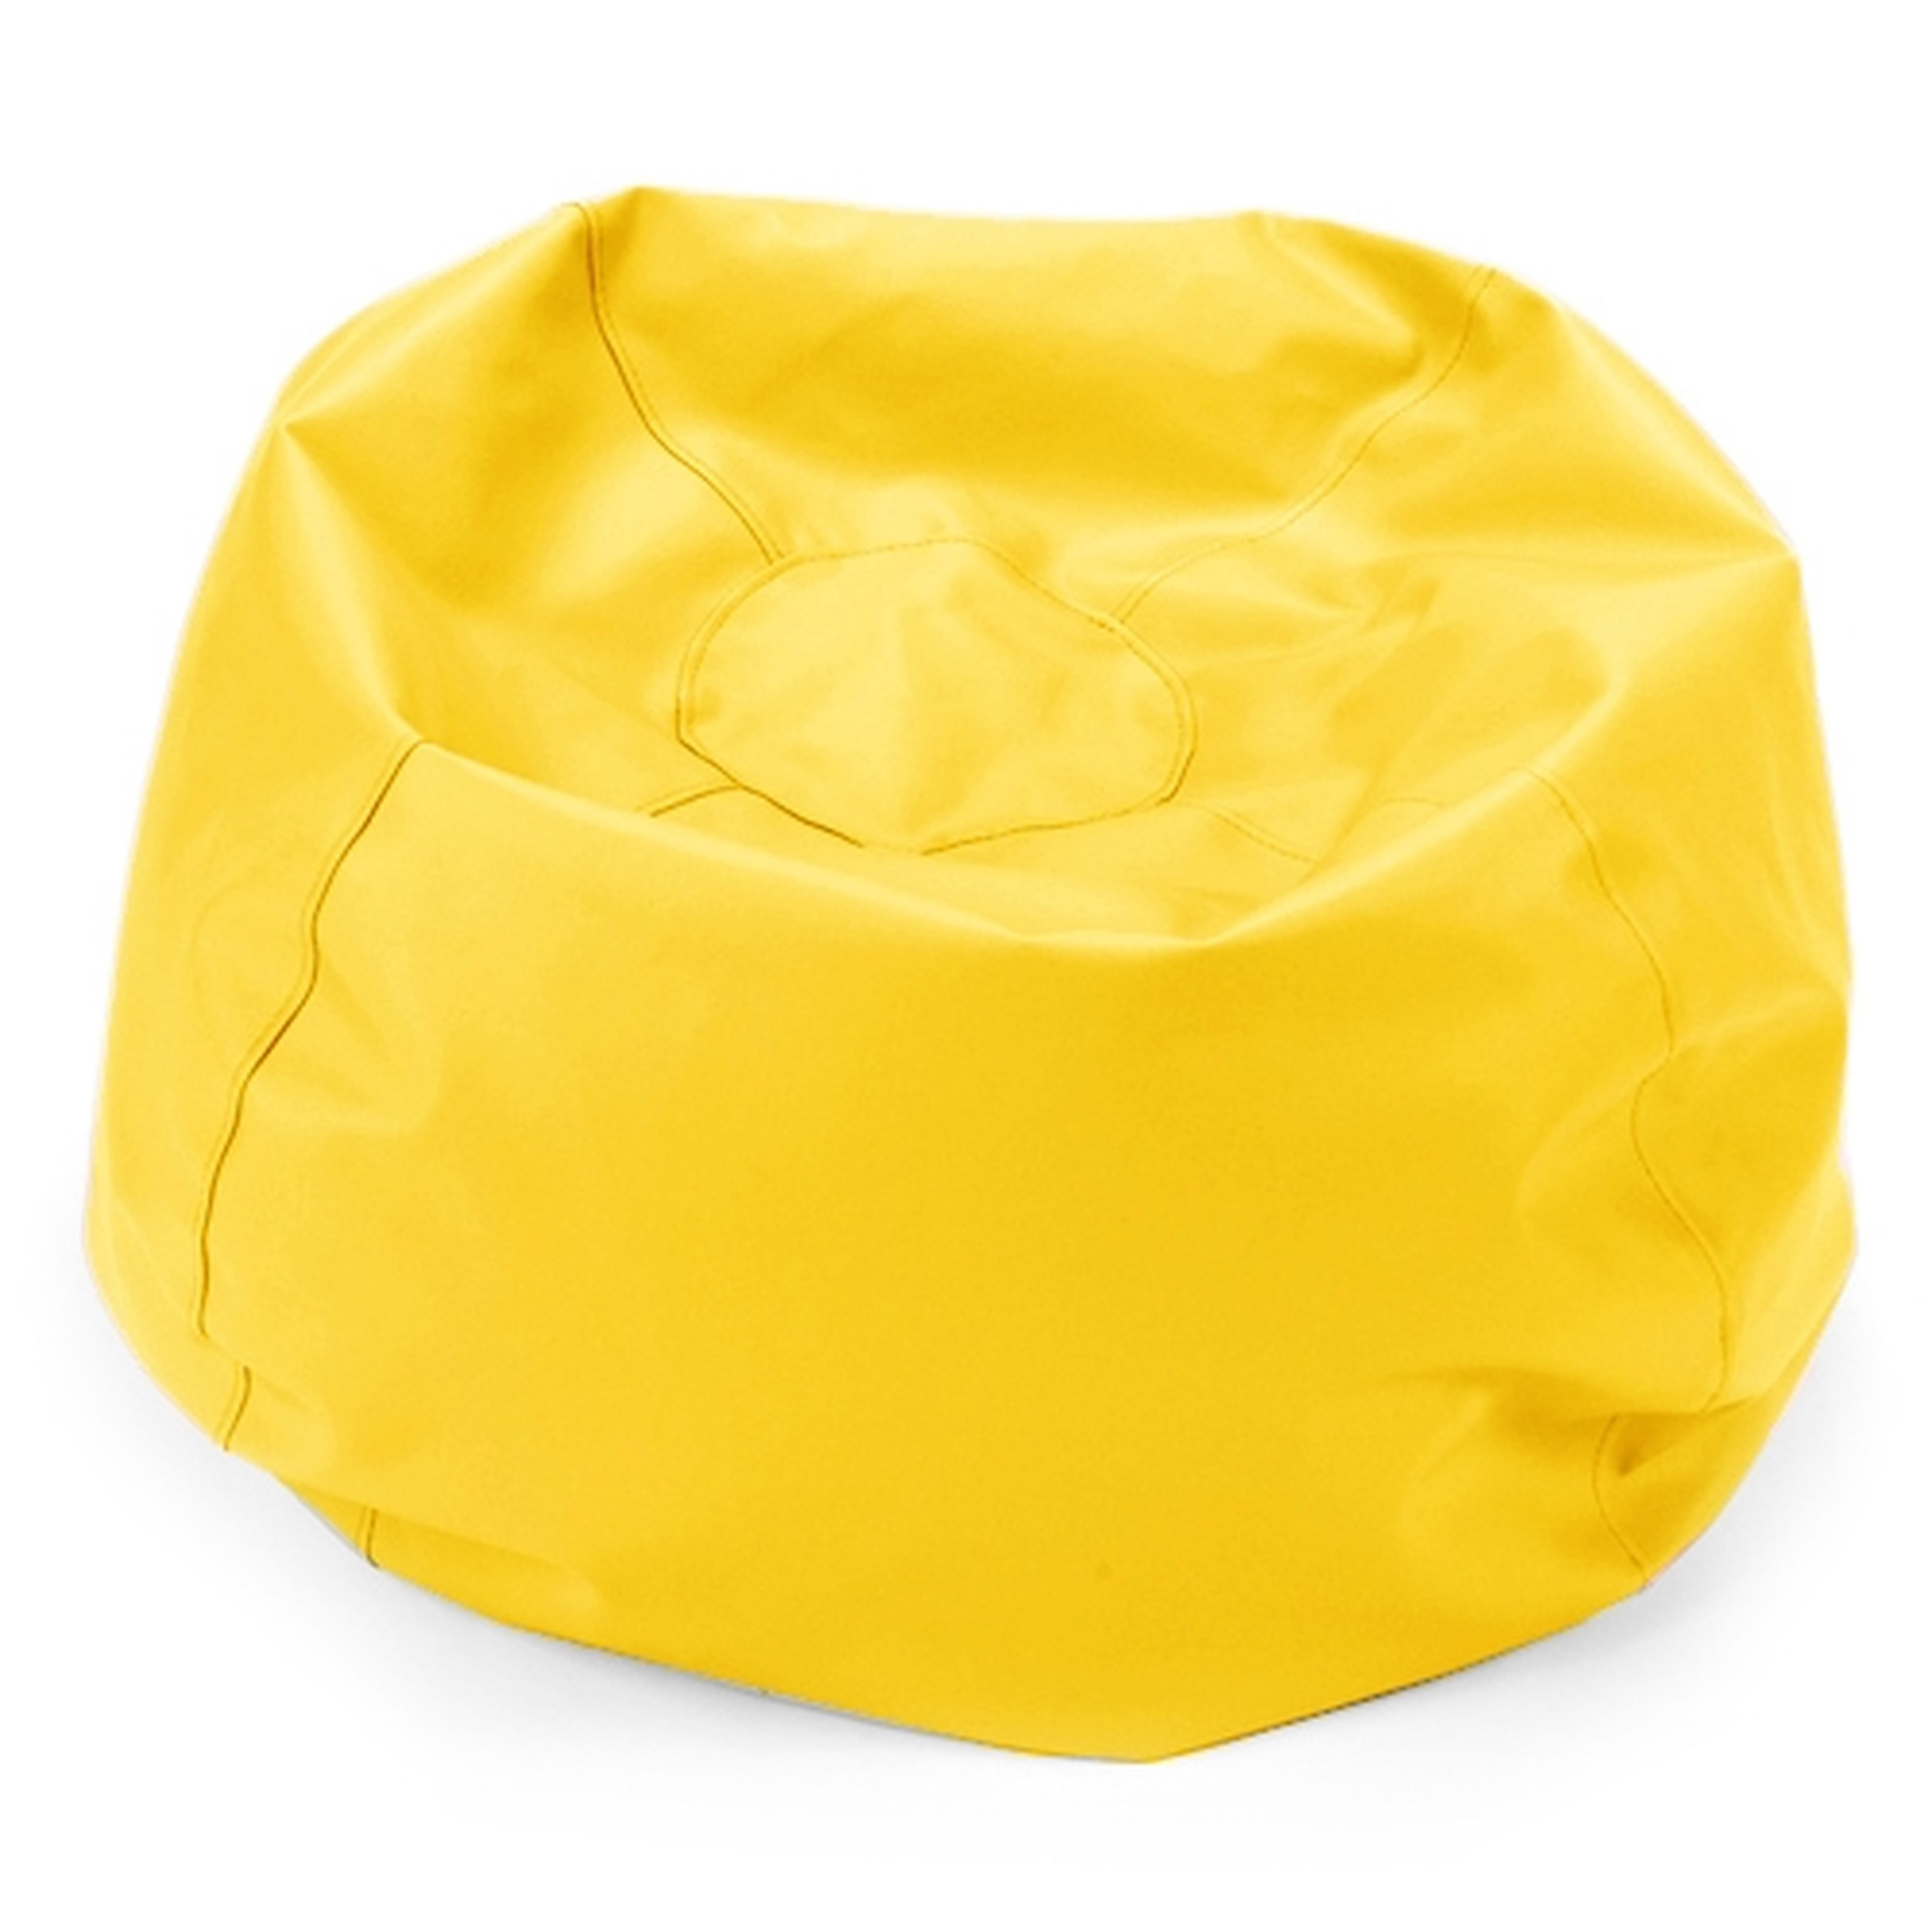 Amazon.com: Armchairs NUBAO Toy Bean Bag Chair/Lazy Lounger/Banana Shape/3  Sizes/Comfortable/Adult/Child,Yellow-S (Color : Yellow, Size : Large) :  Home & Kitchen